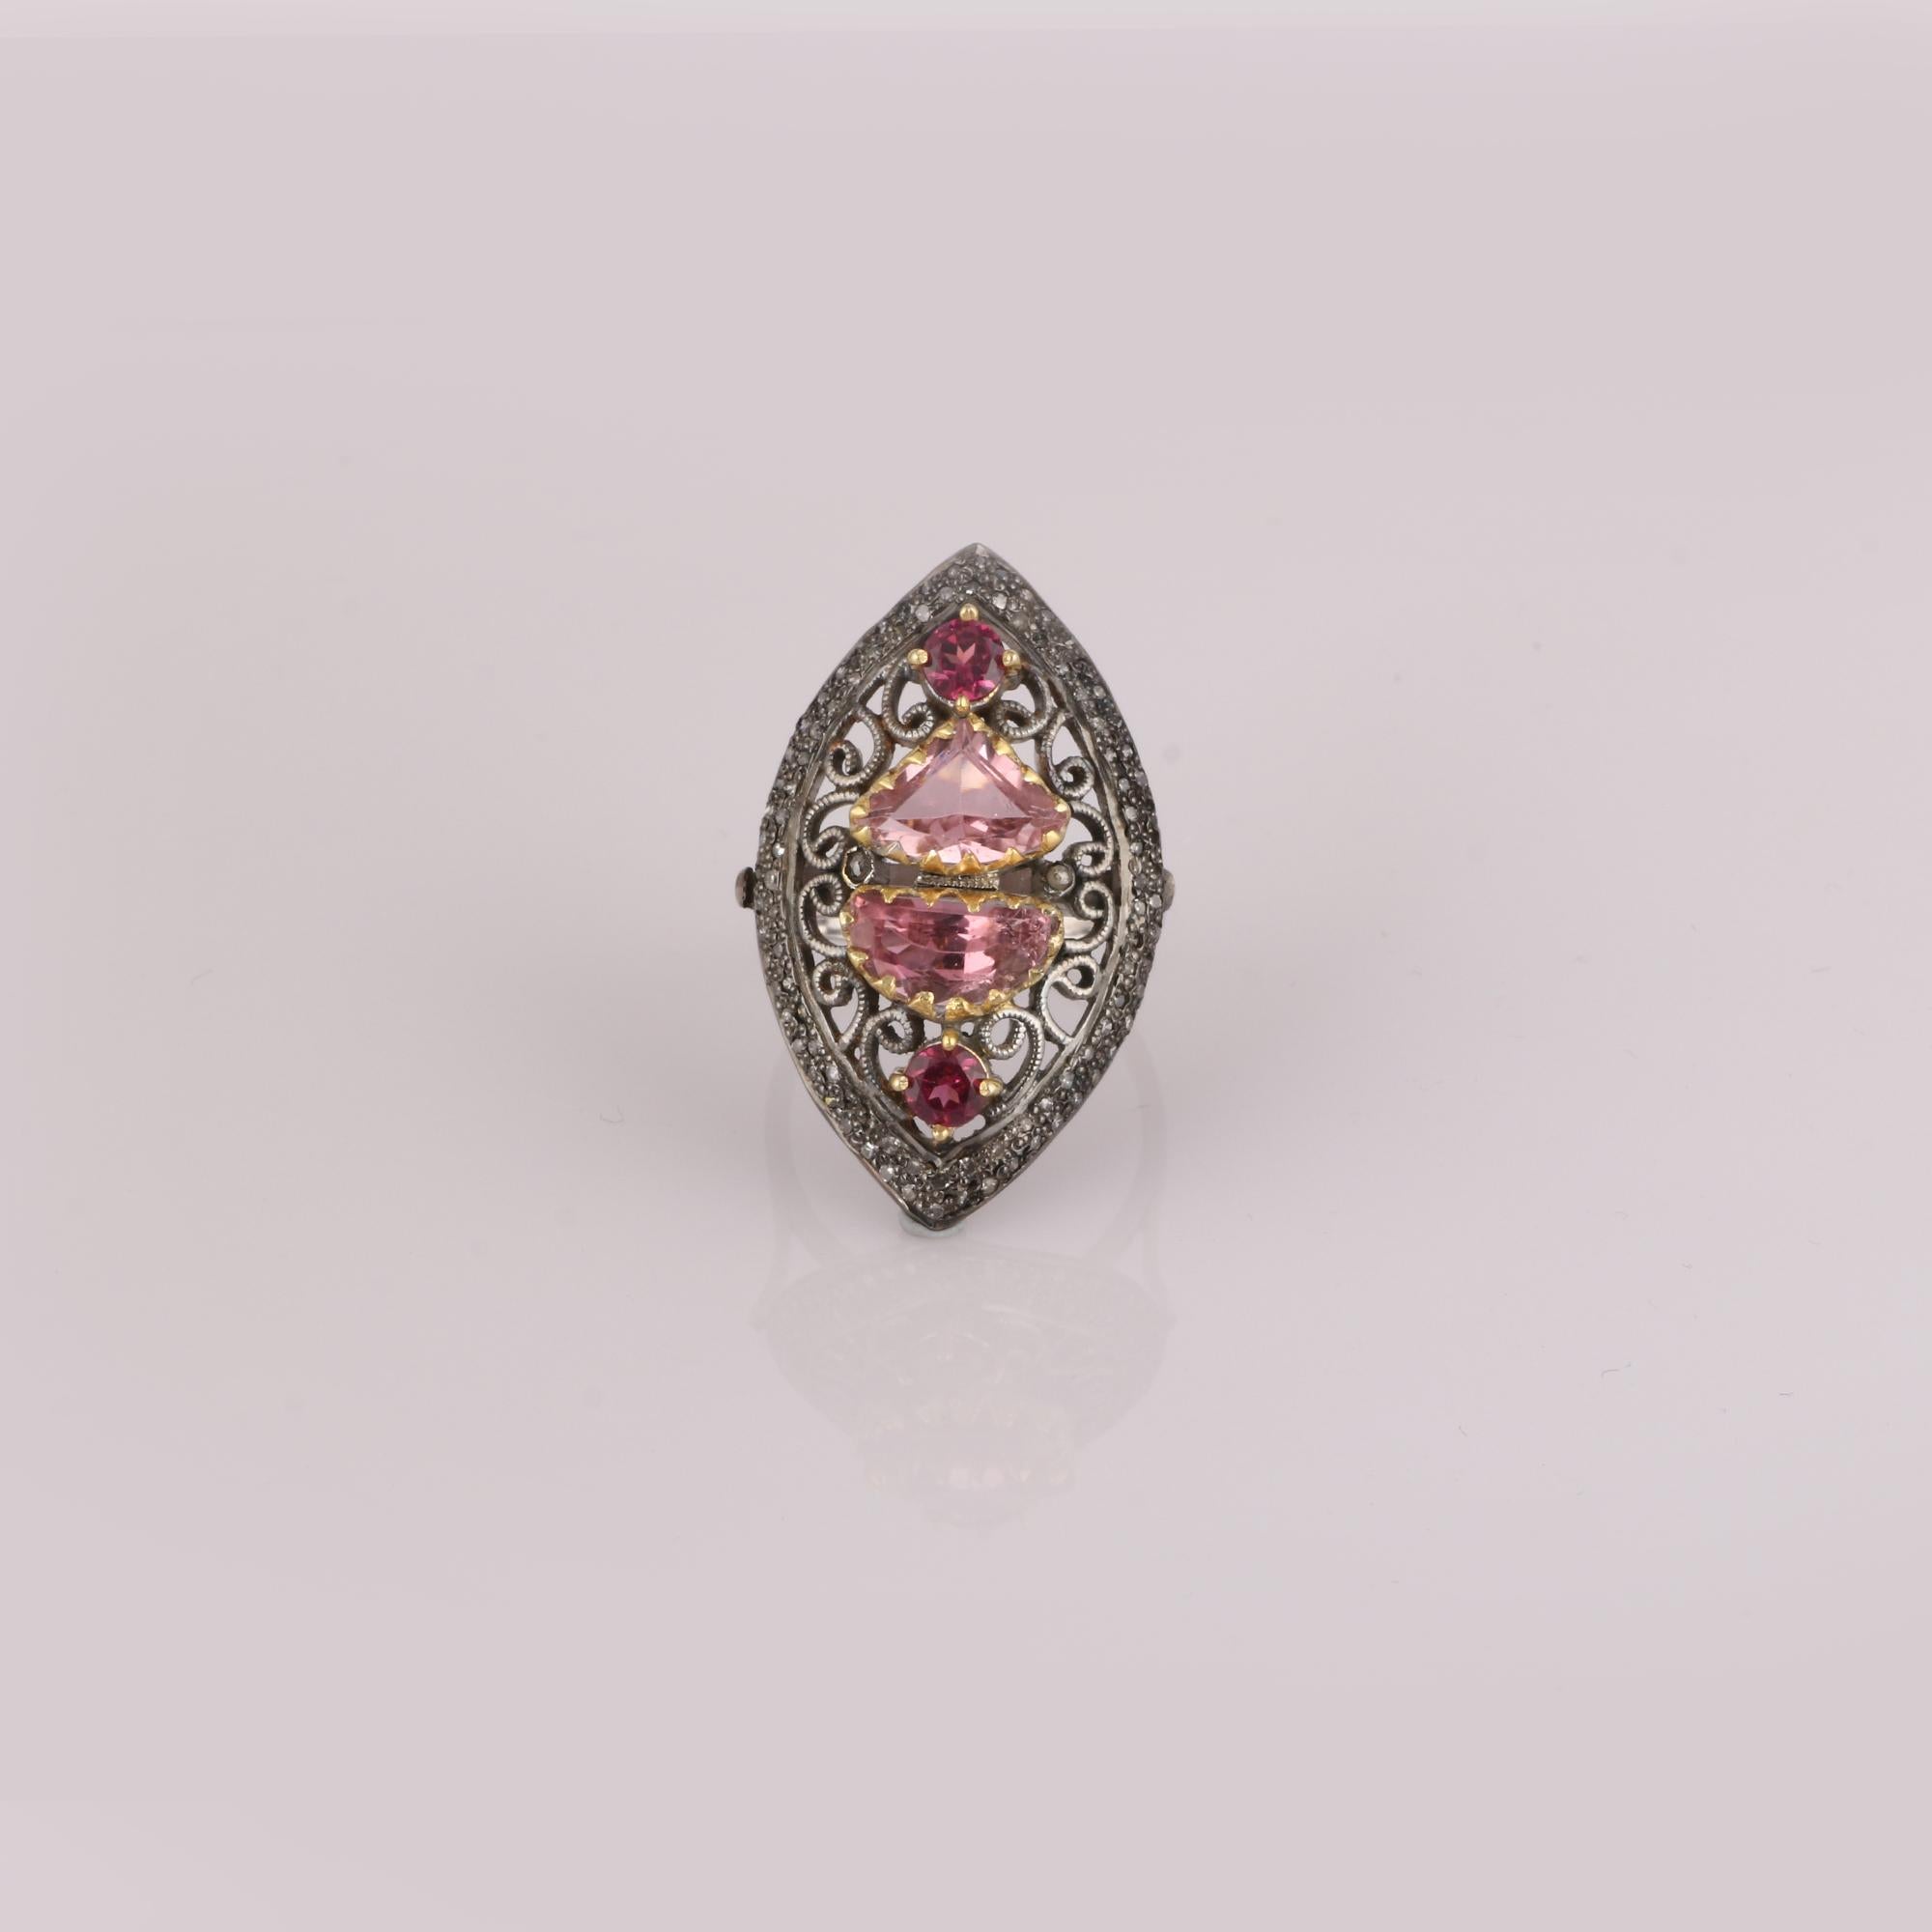 Item details:-

✦ SKU:- ESRG00226

✦ Material :- 925 Sterling Silver
✦ Gemstone Specification:-
✧ Diamond
✧ Rubellite, Rose Quartz

✦ Approx. Diamond Weight : 0.6
✦ Approx. Silver Weight : 6.14
✦ Approx. Gross Weight : 6.88

Ring Size (US): 7

You